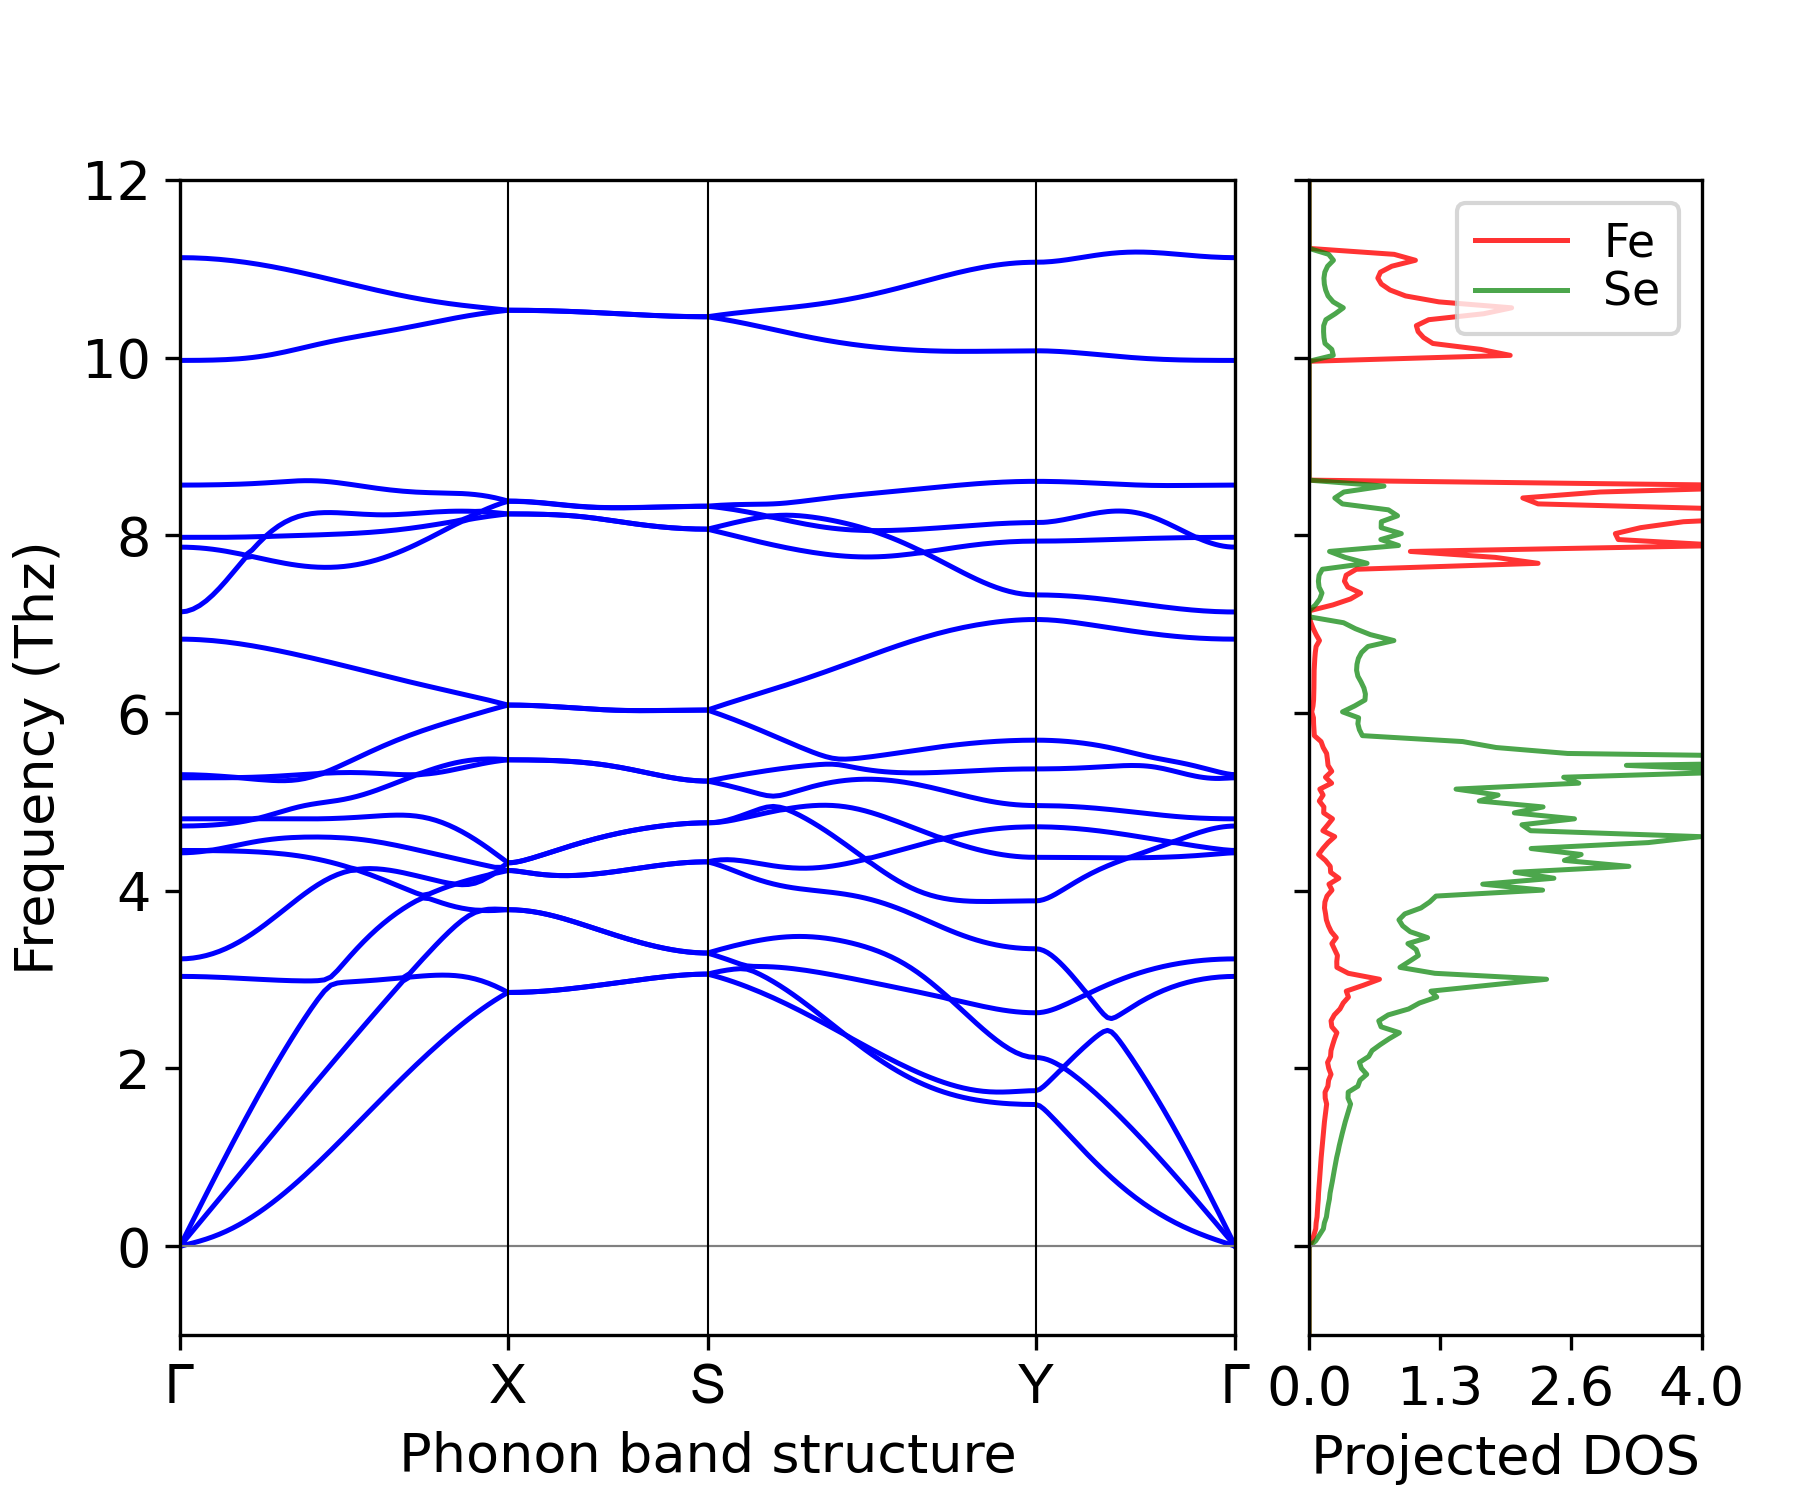 ../_images/phonon_BAND_LDOS-FeSe2_P2_1^m.png